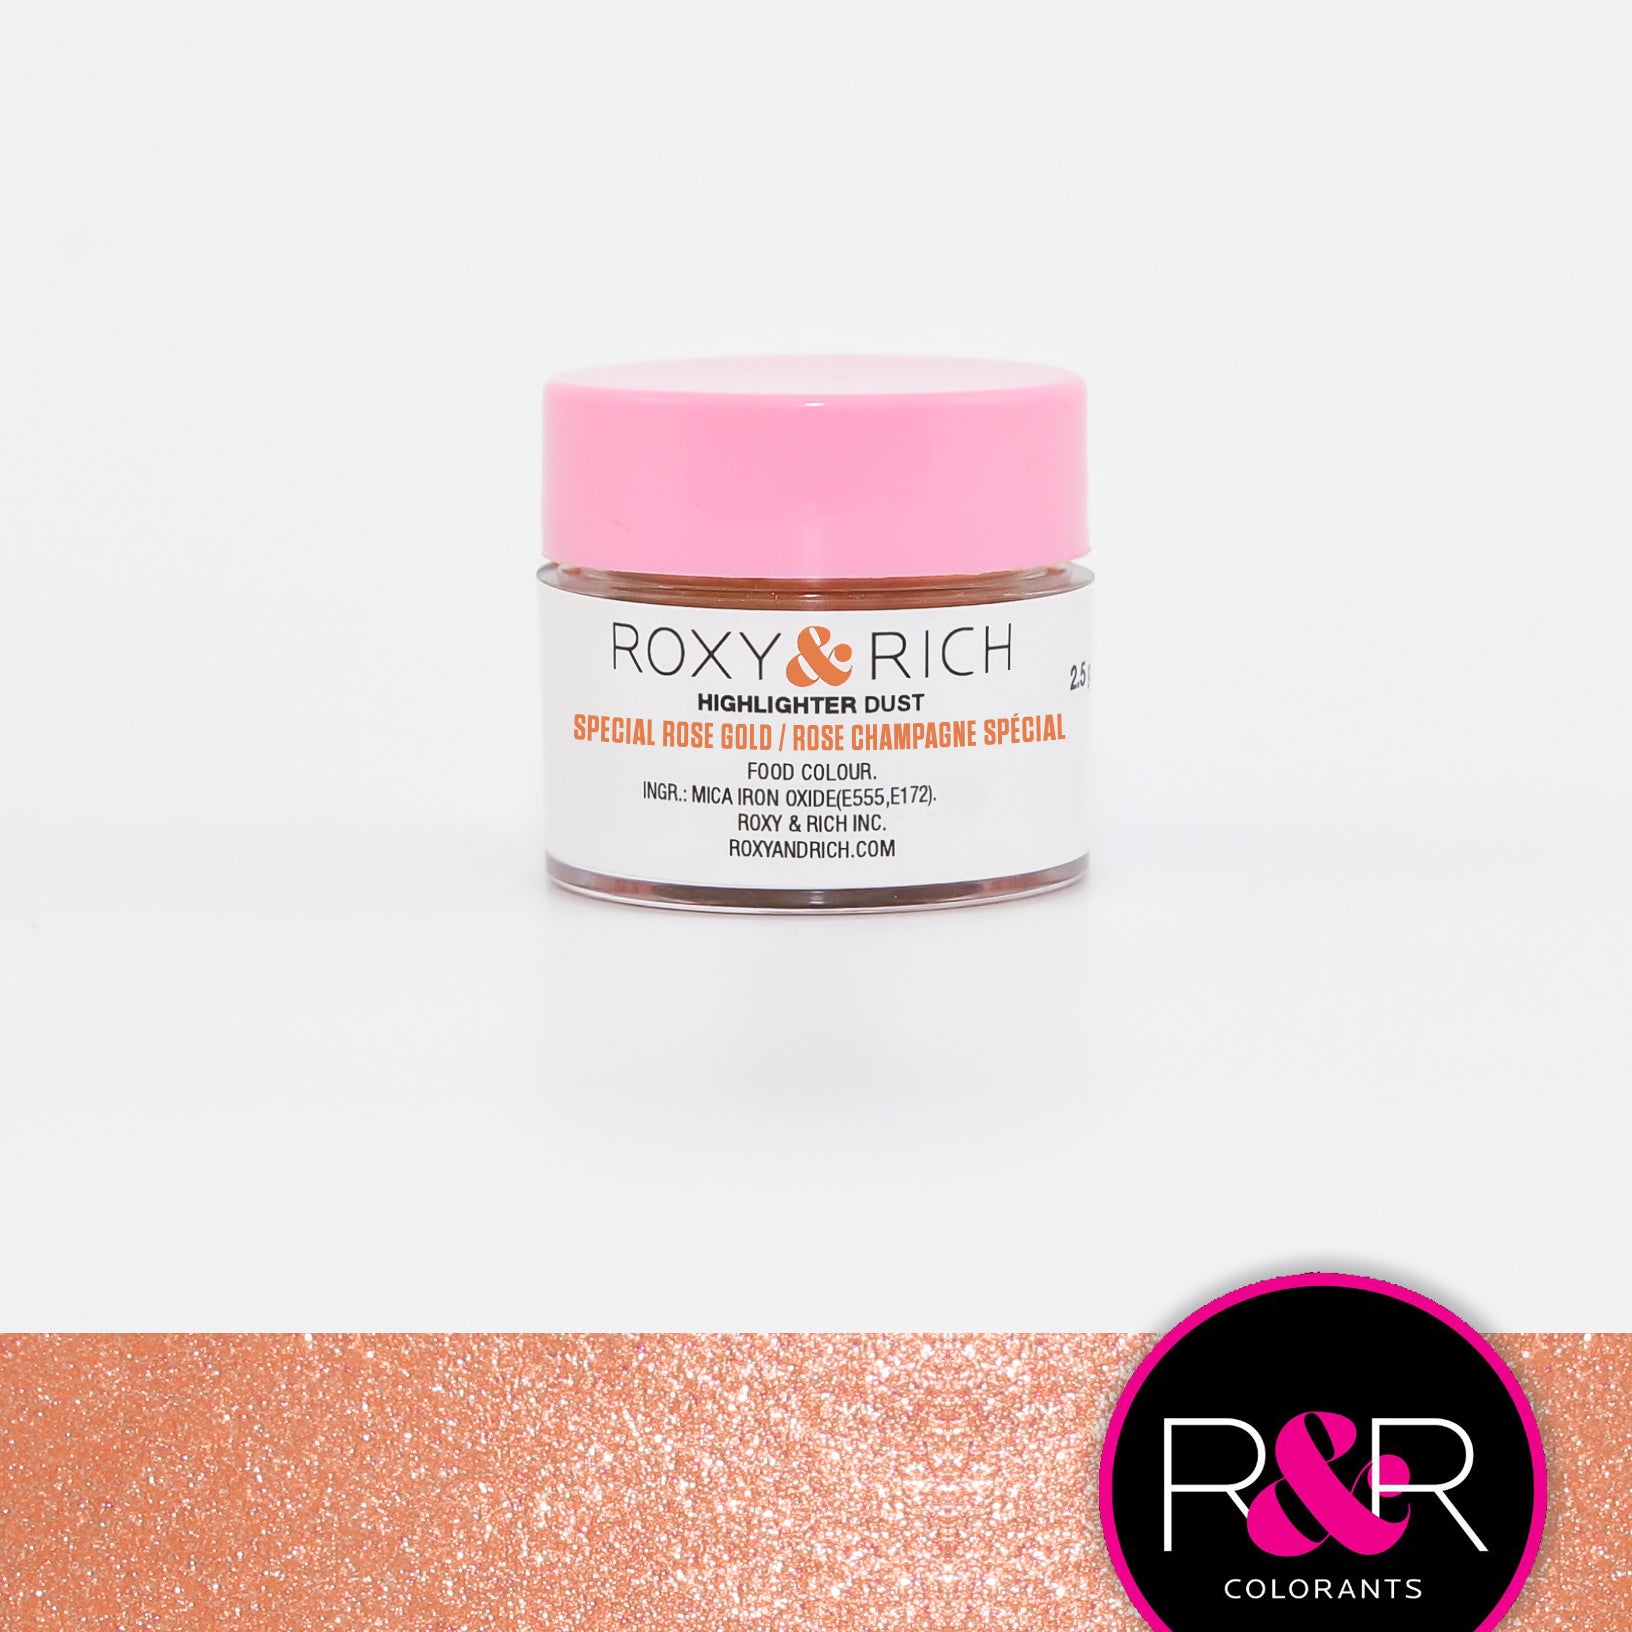 Poudre Highlighter couleur Rose Champagne Spécial    - Roxy & Rich - Poudre Highlighter - 